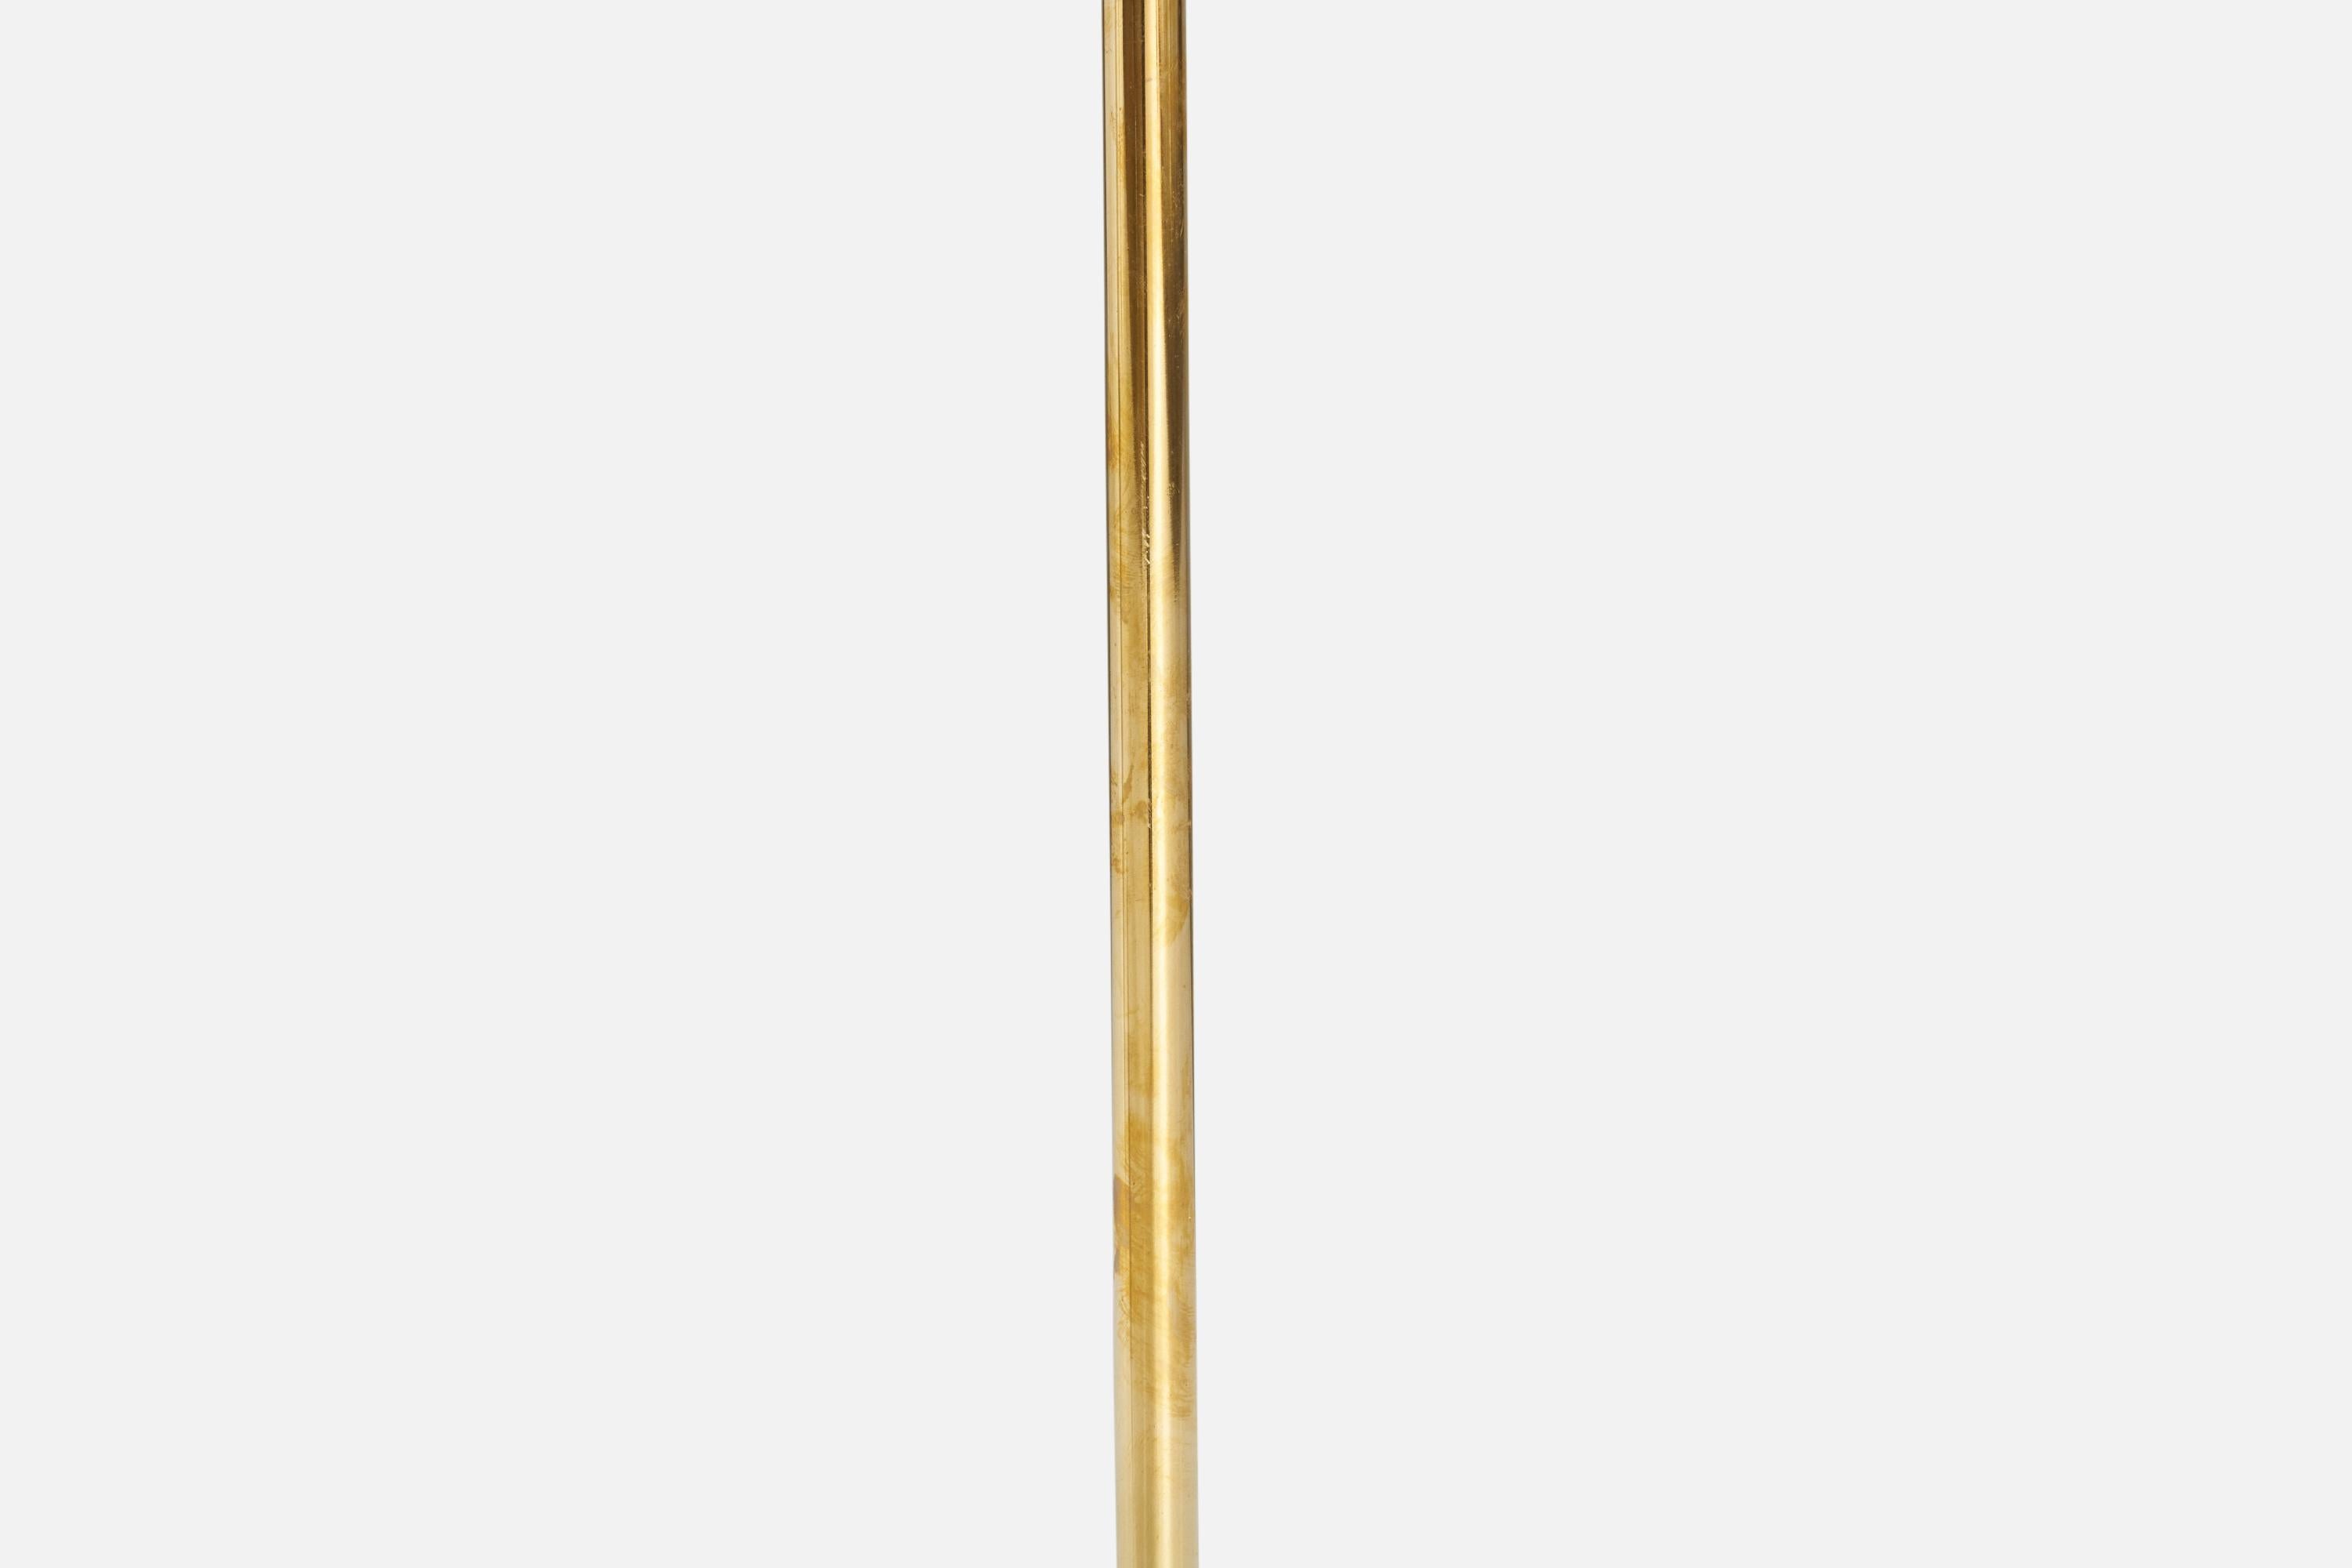 Nya Öia, Floor Lamp, Brass, Rattan, Sweden, 1970s In Good Condition For Sale In High Point, NC